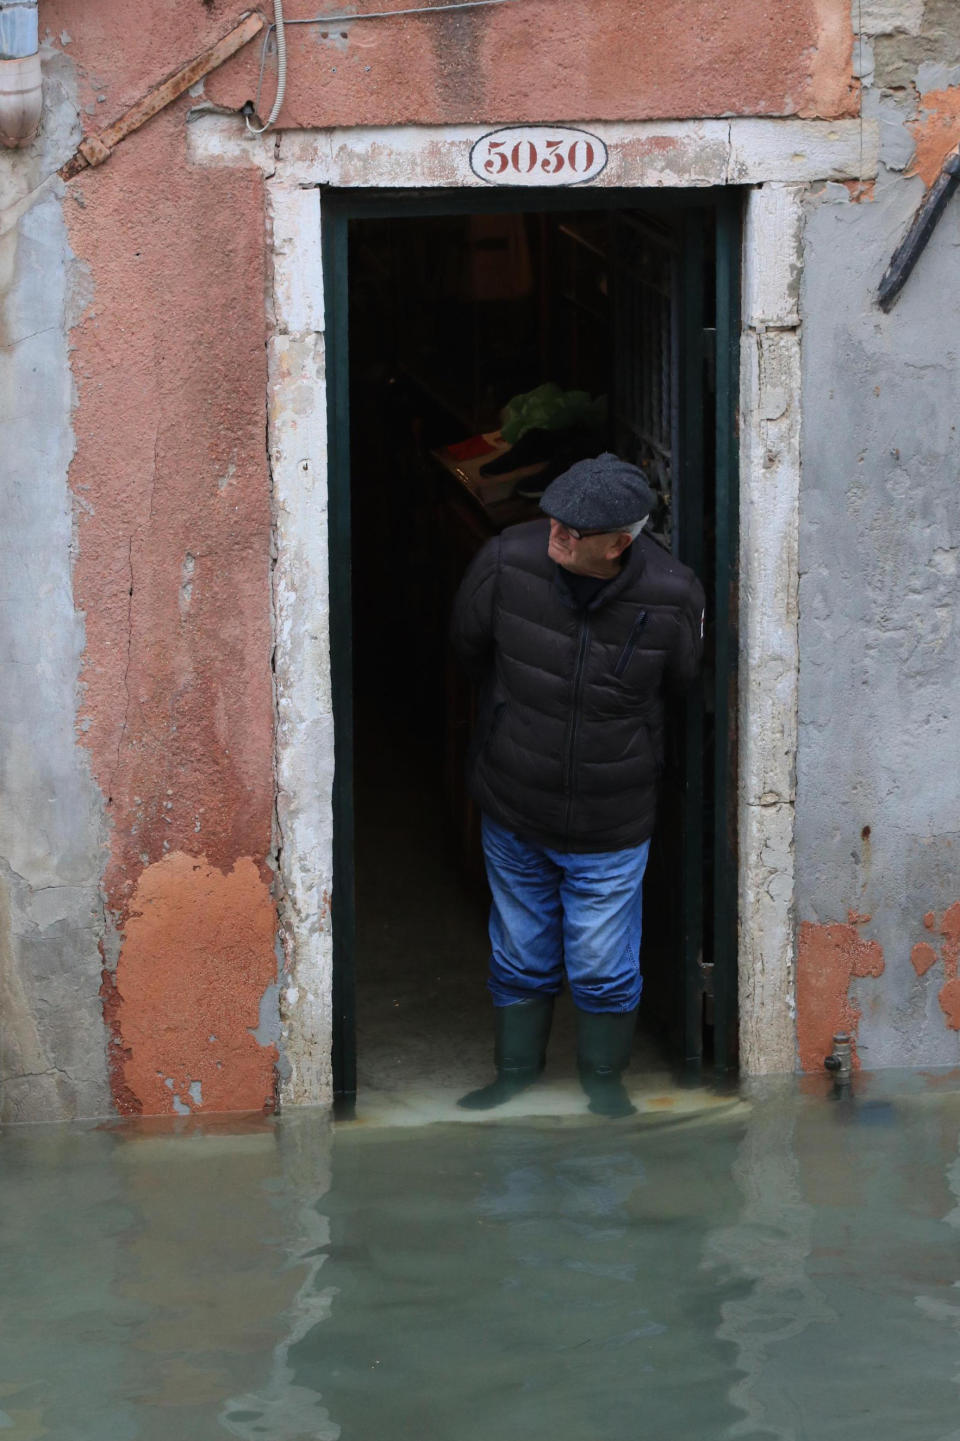 A man looks out of a doorway at the flooding in Venice, Italy, Friday, Nov. 15, 2019. Exceptionally high tidal waters returned to Venice on Friday, prompting the mayor to close the iconic St. Mark's Square and call for donations to repair the Italian lagoon city just three days after it experienced its worst flooding in 50 years. (Emiliano Crespi/ANSA via AP)